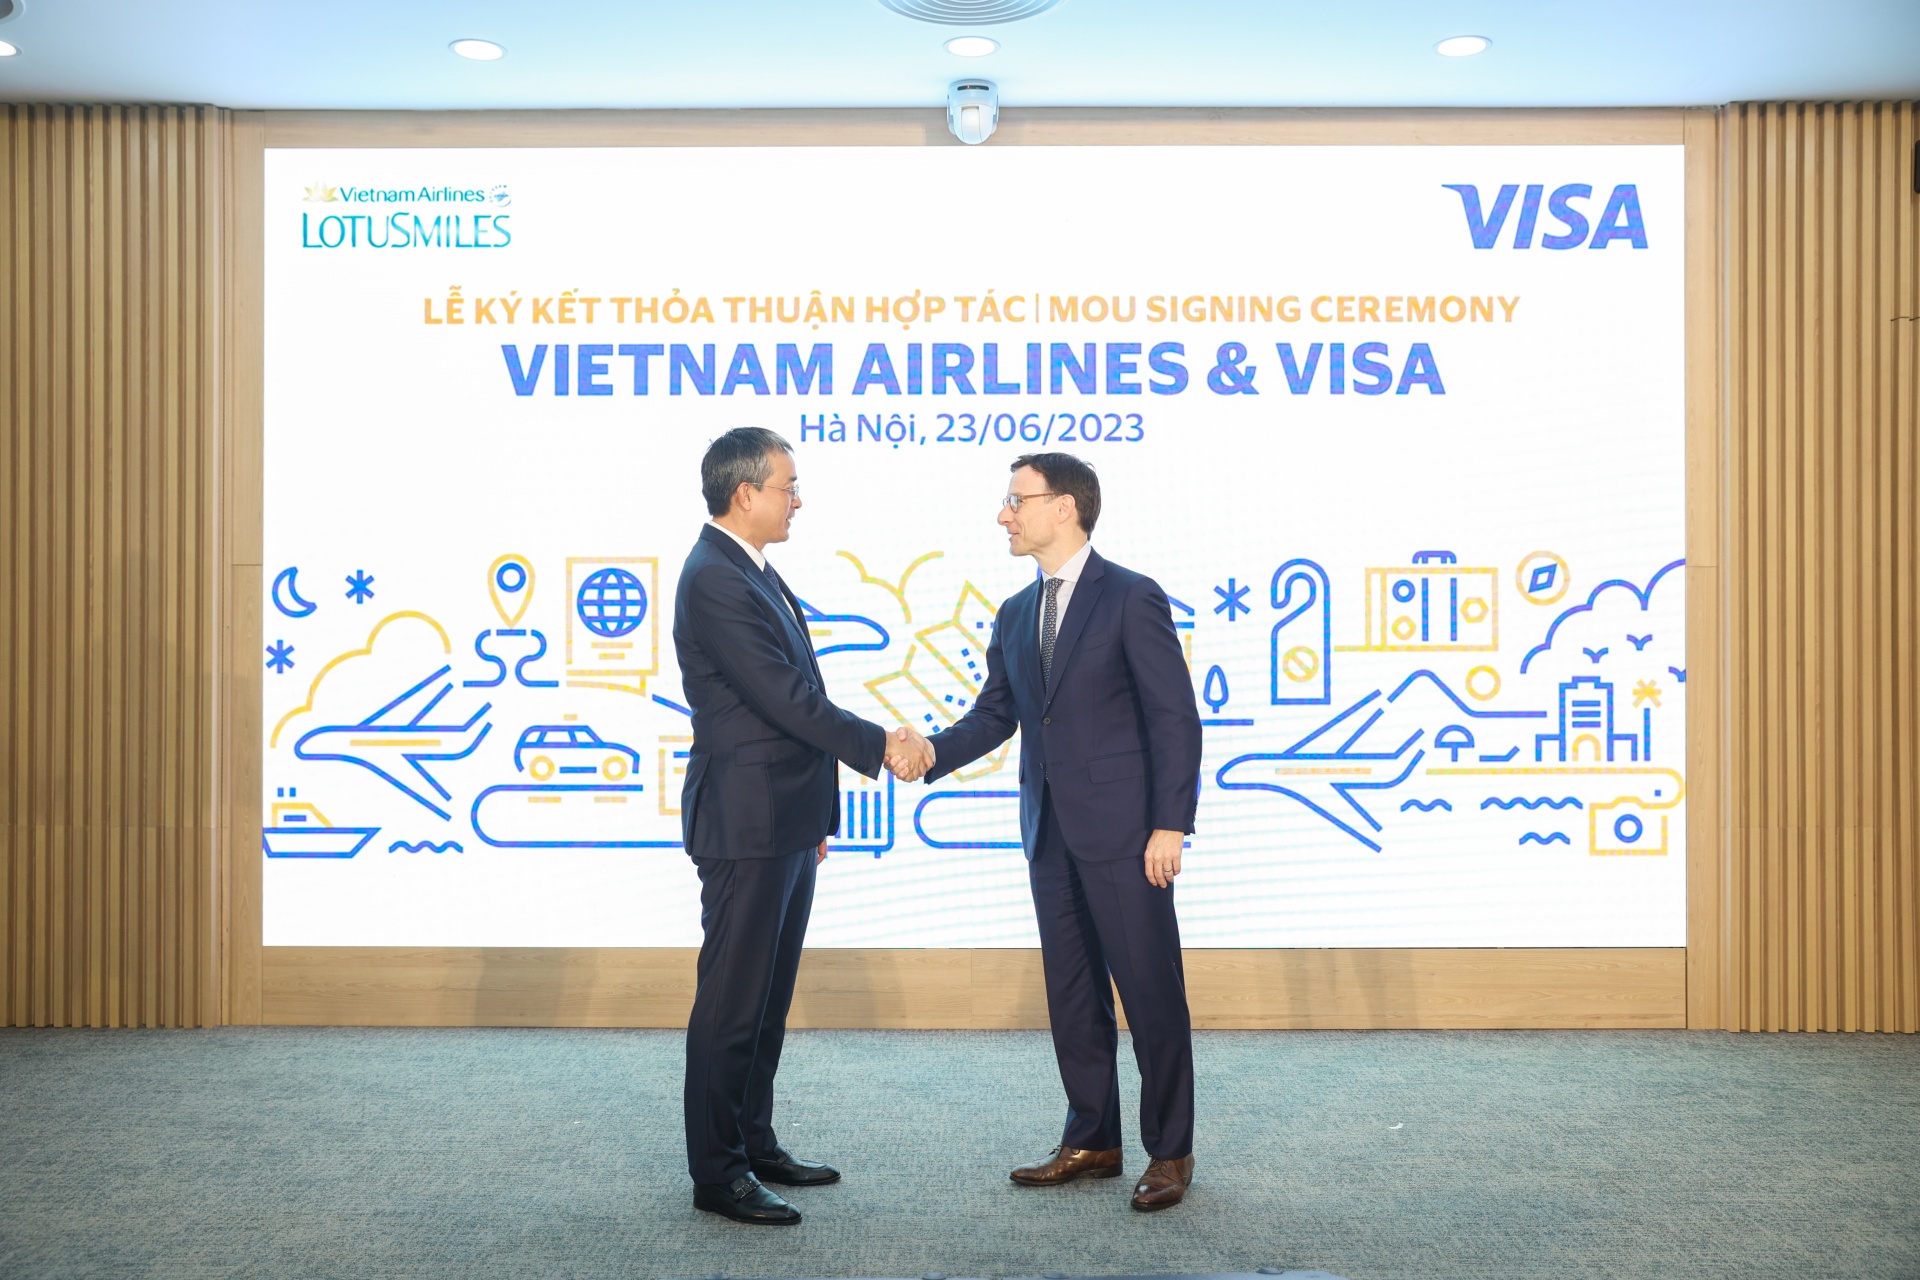 Visa and Vietnam Airlines enhance digital experience for consumers